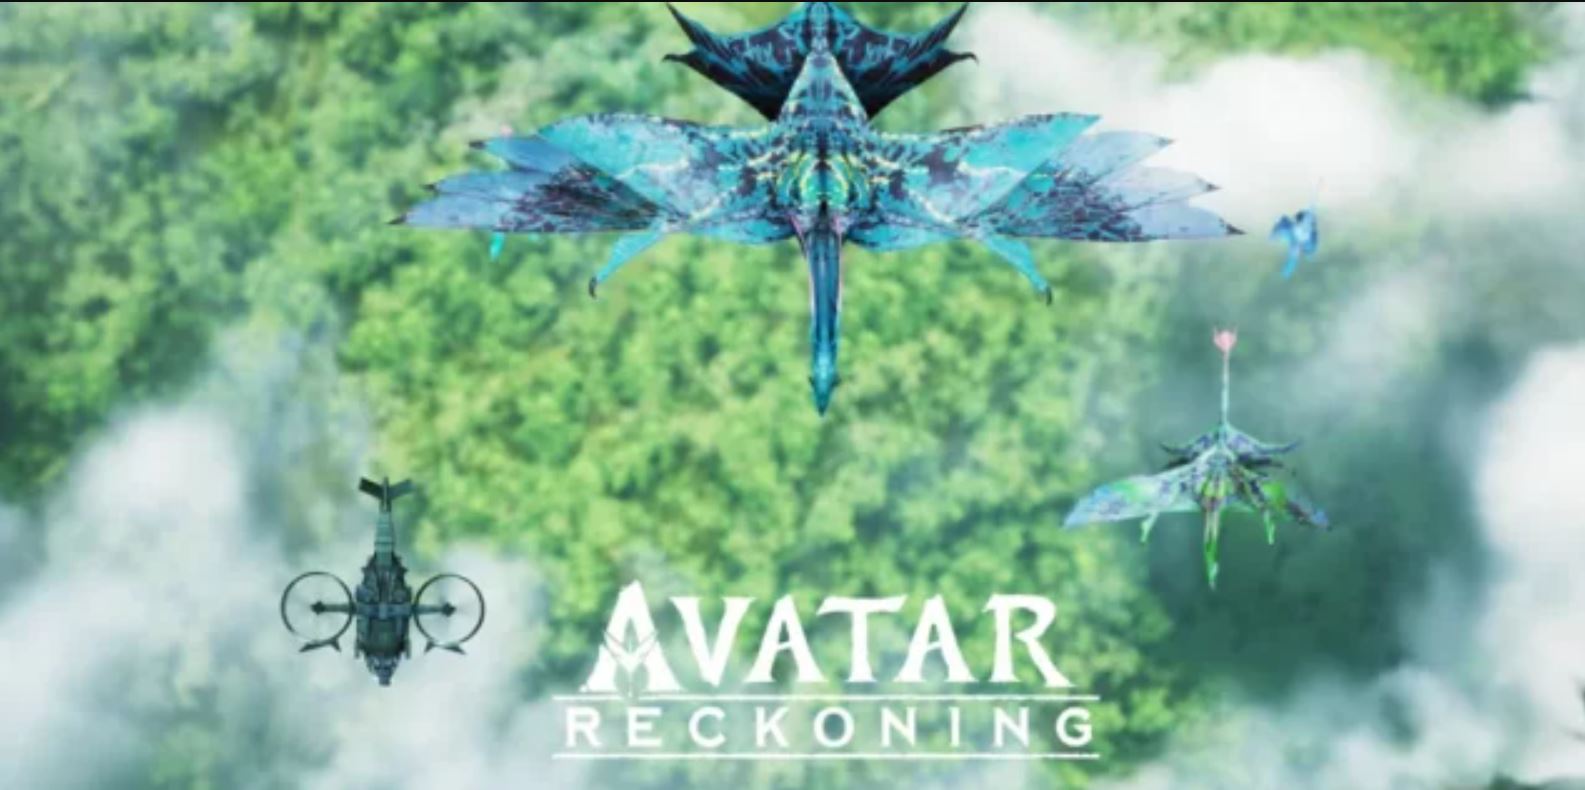 In a recent announcement, Archosaur, the developer behind Avatar: Reckoning, has decided to cancel the much-anticipated mobile-exclusive MMO